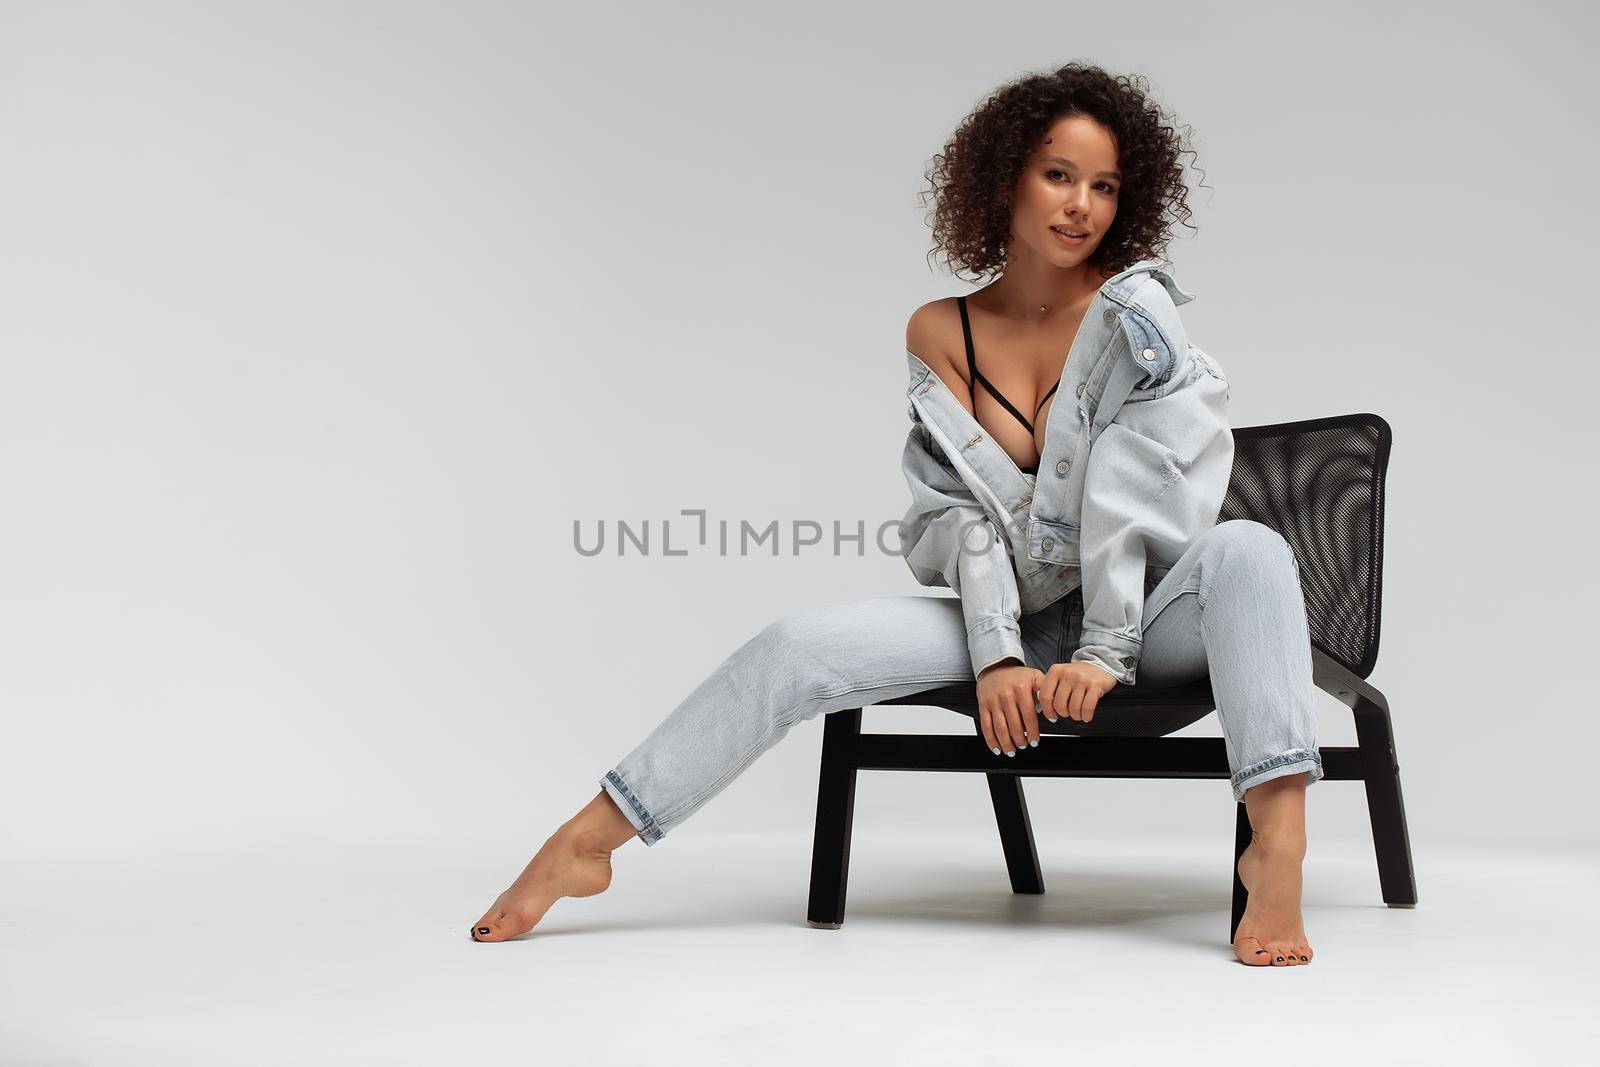 Full body of confident young barefoot female model with curly hairstyle wearing trendy denim jacket and jeans sitting on chair in white studio